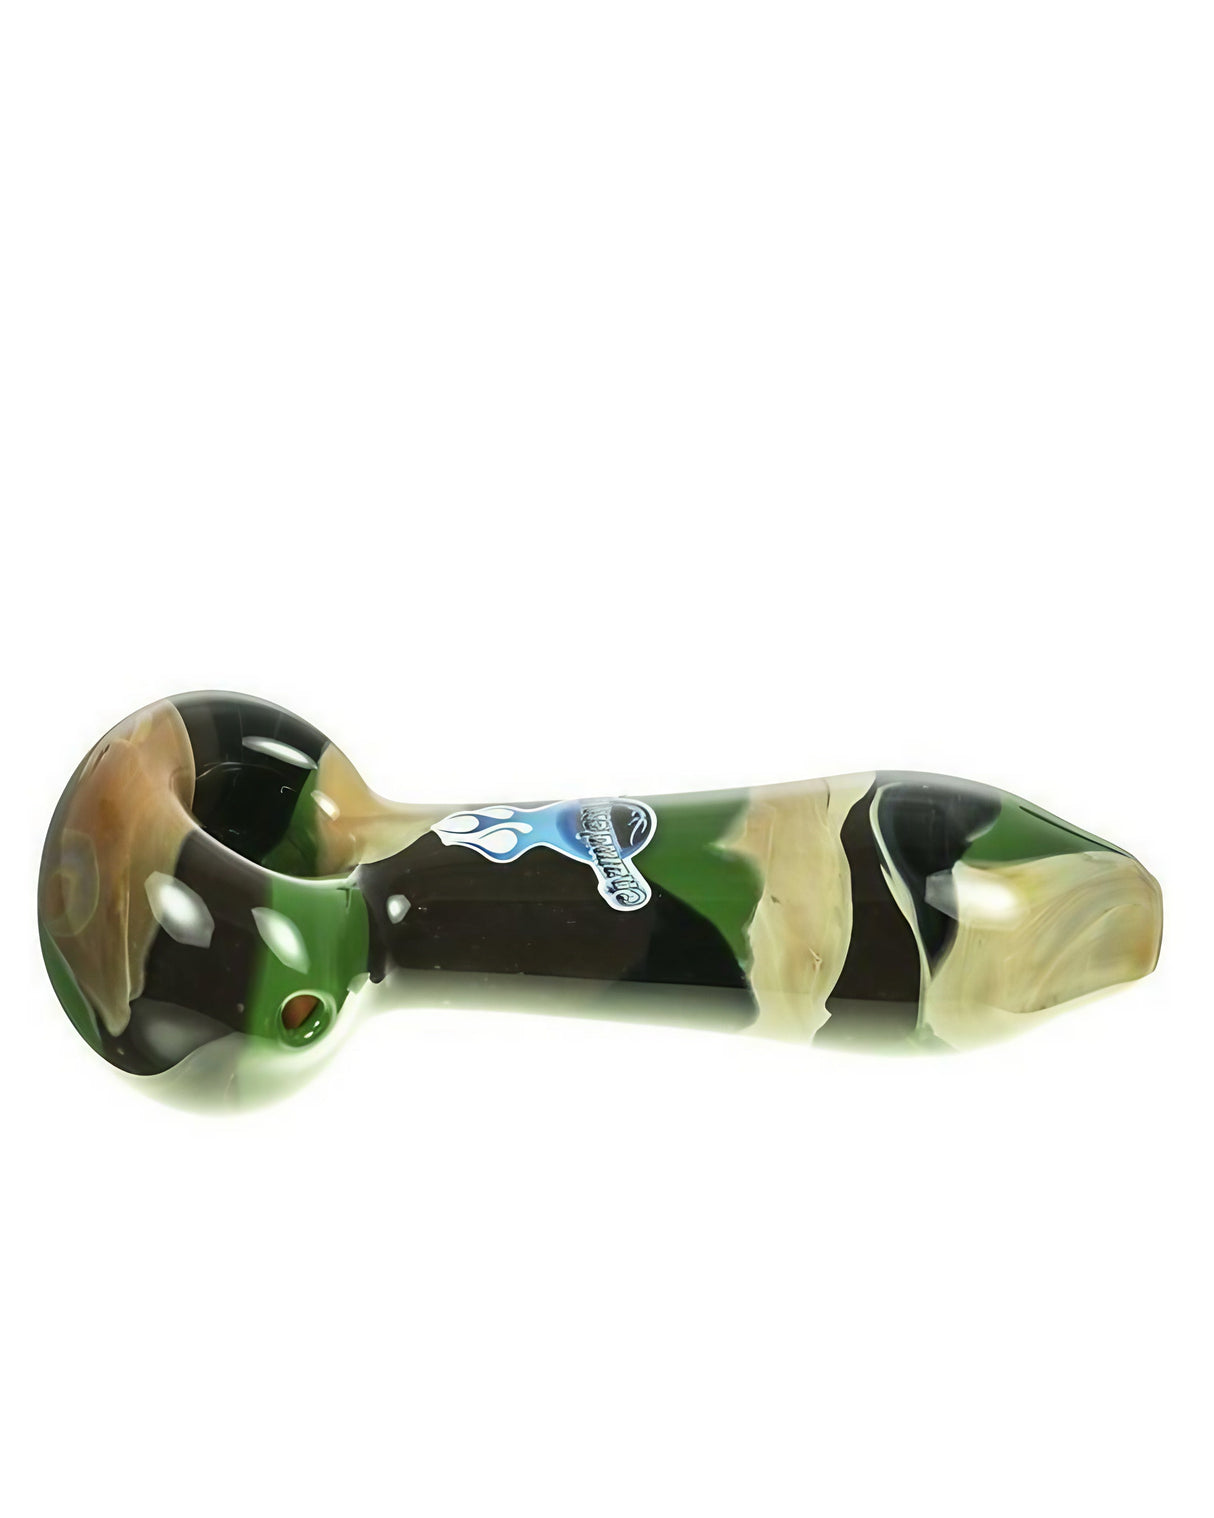 Chameleon Glass Warrior Camouflage Hand Pipe, Borosilicate Glass, Side View